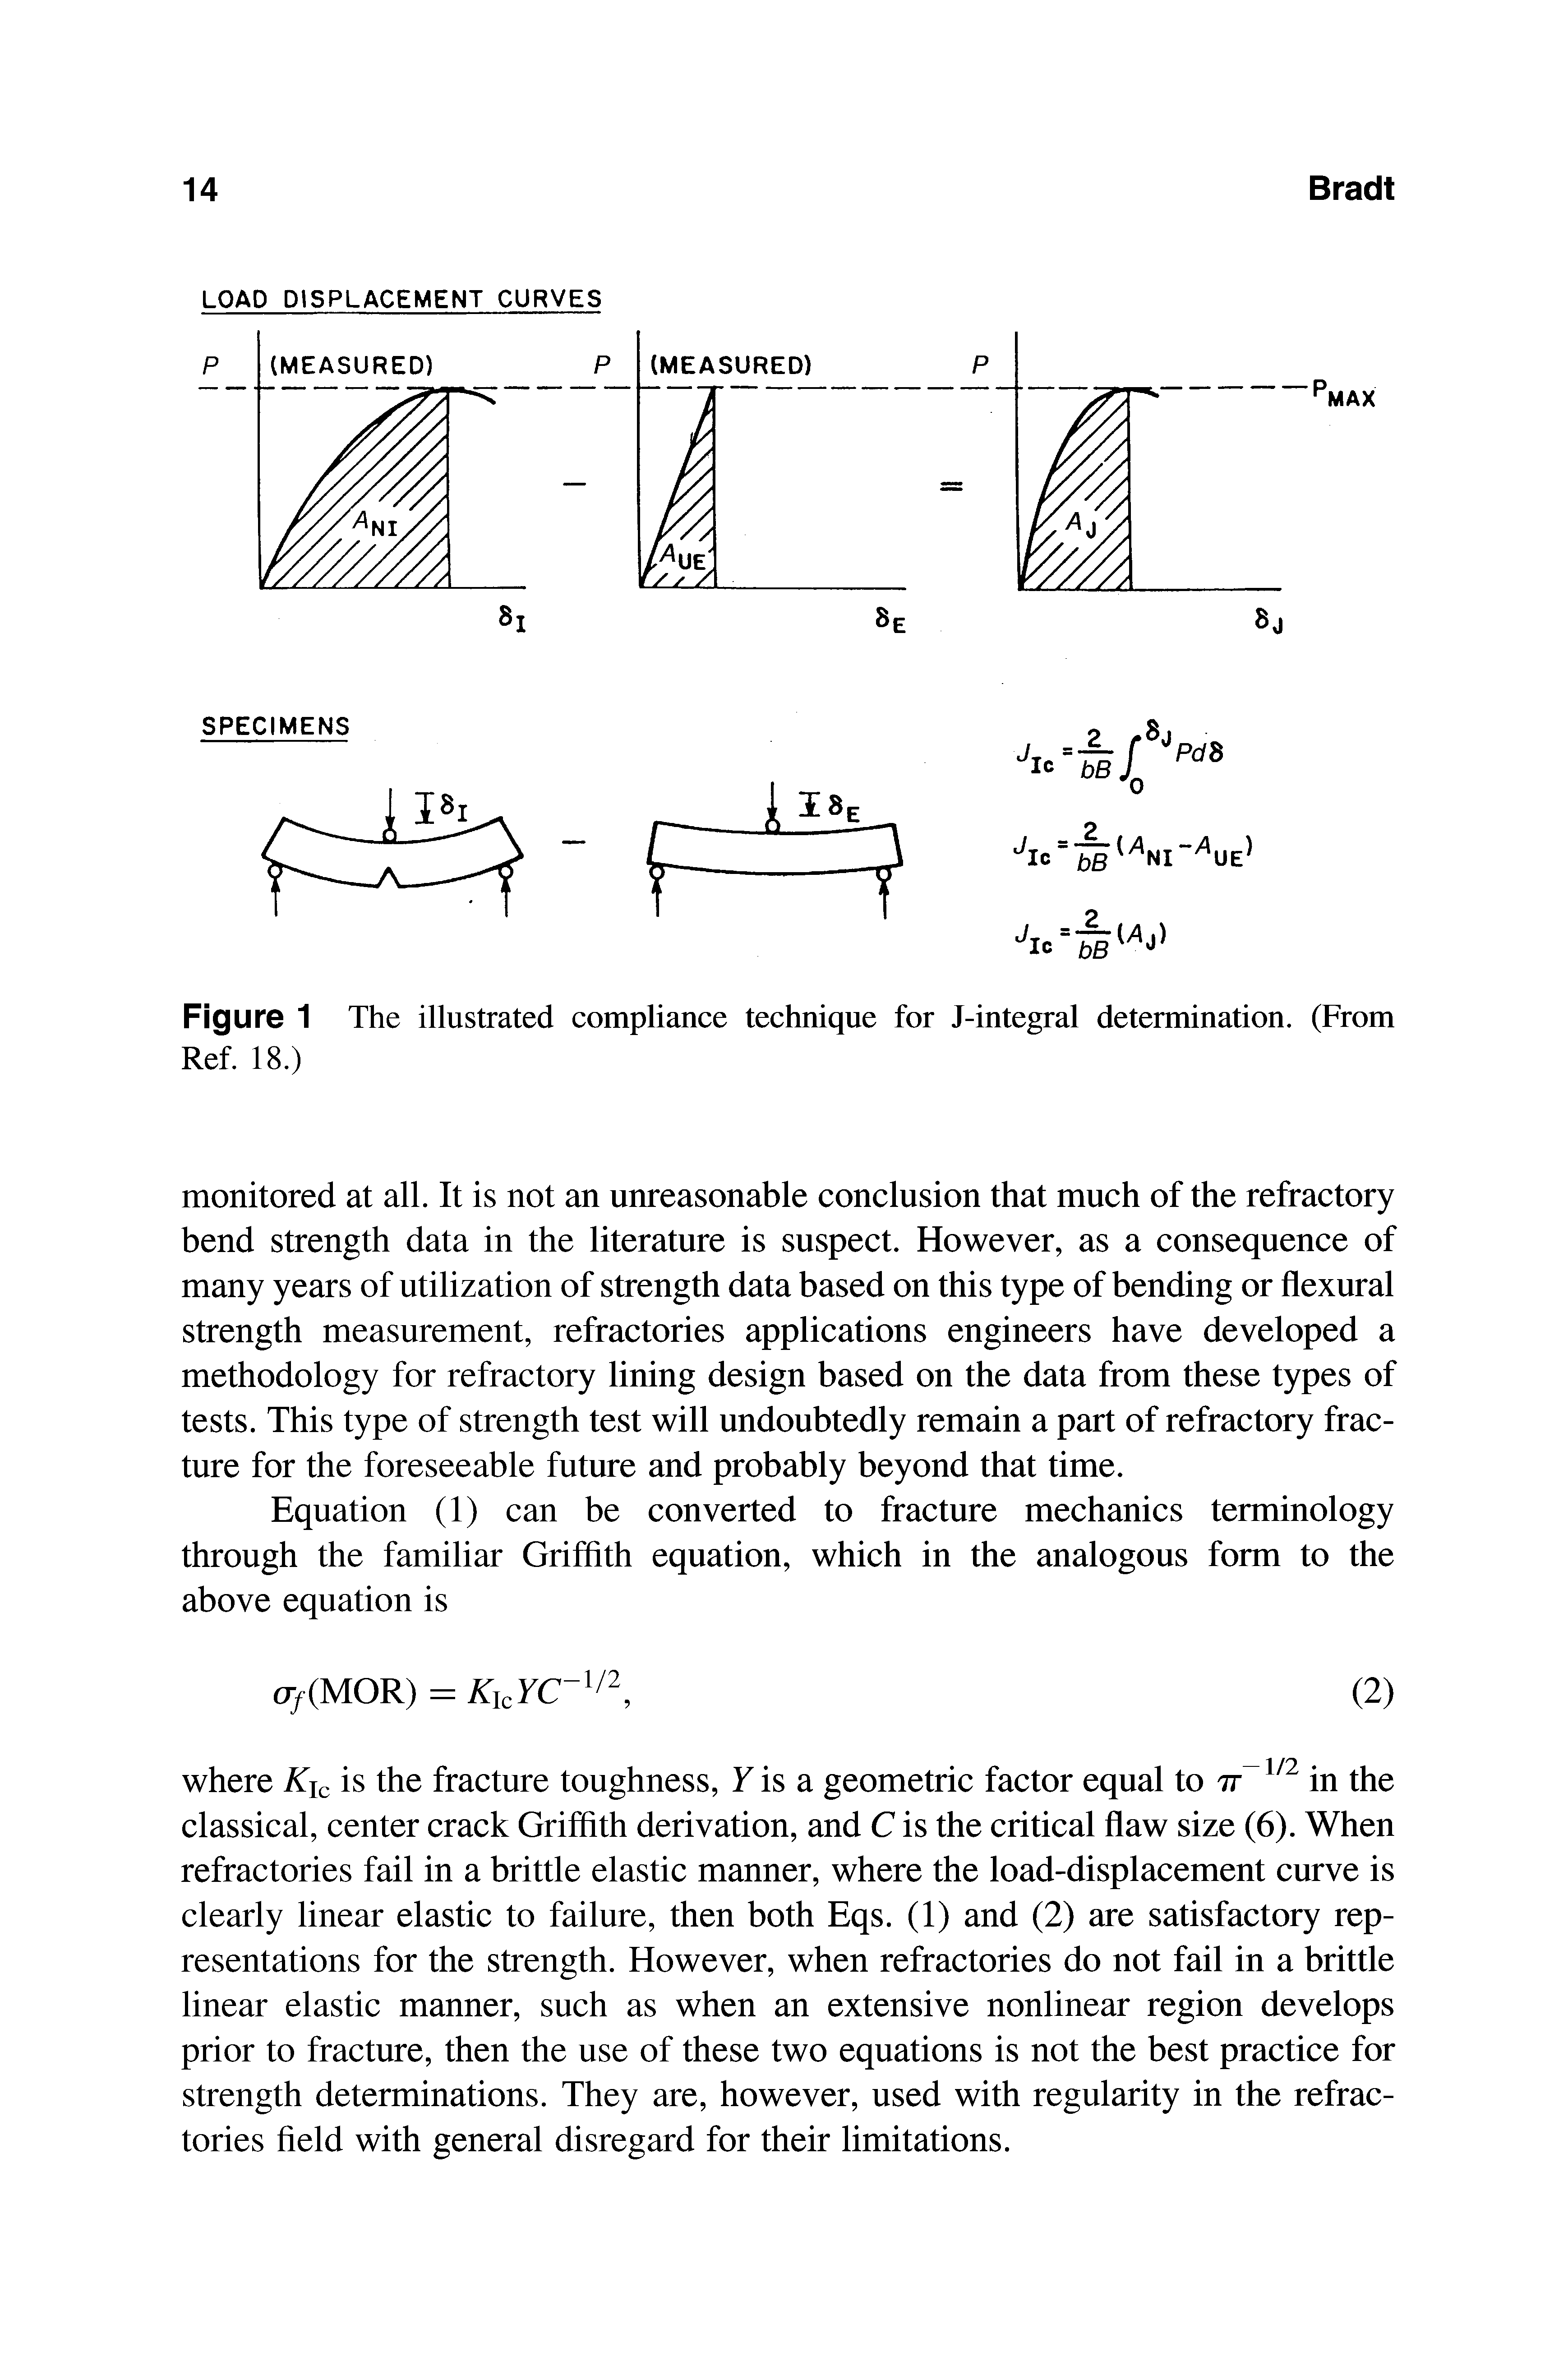 Figure 1 The illustrated compliance technique for J-integral determination. (From Ref. 18.)...